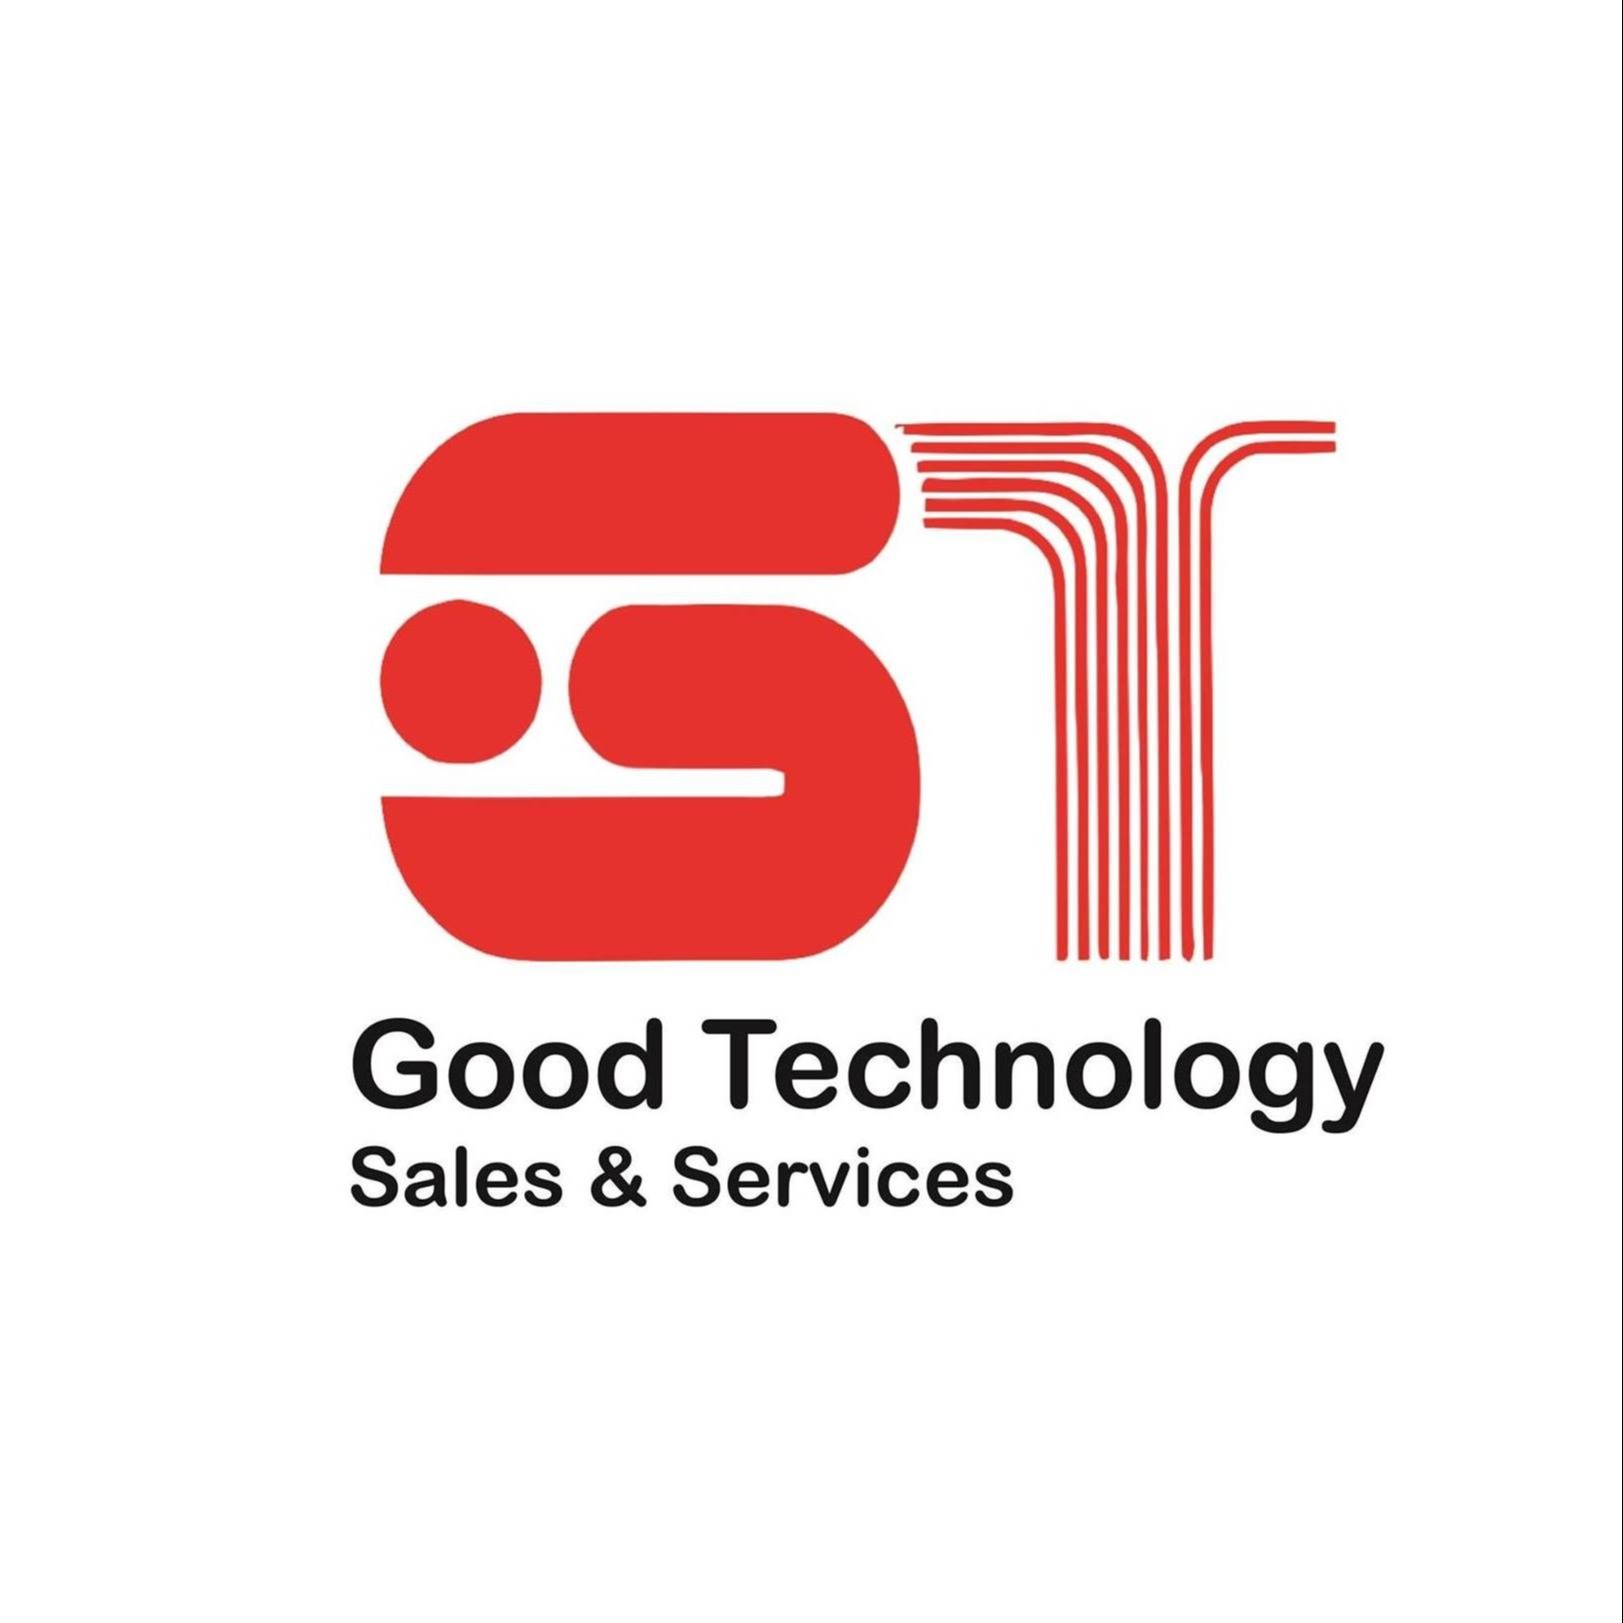 Good Technology Sales & Services